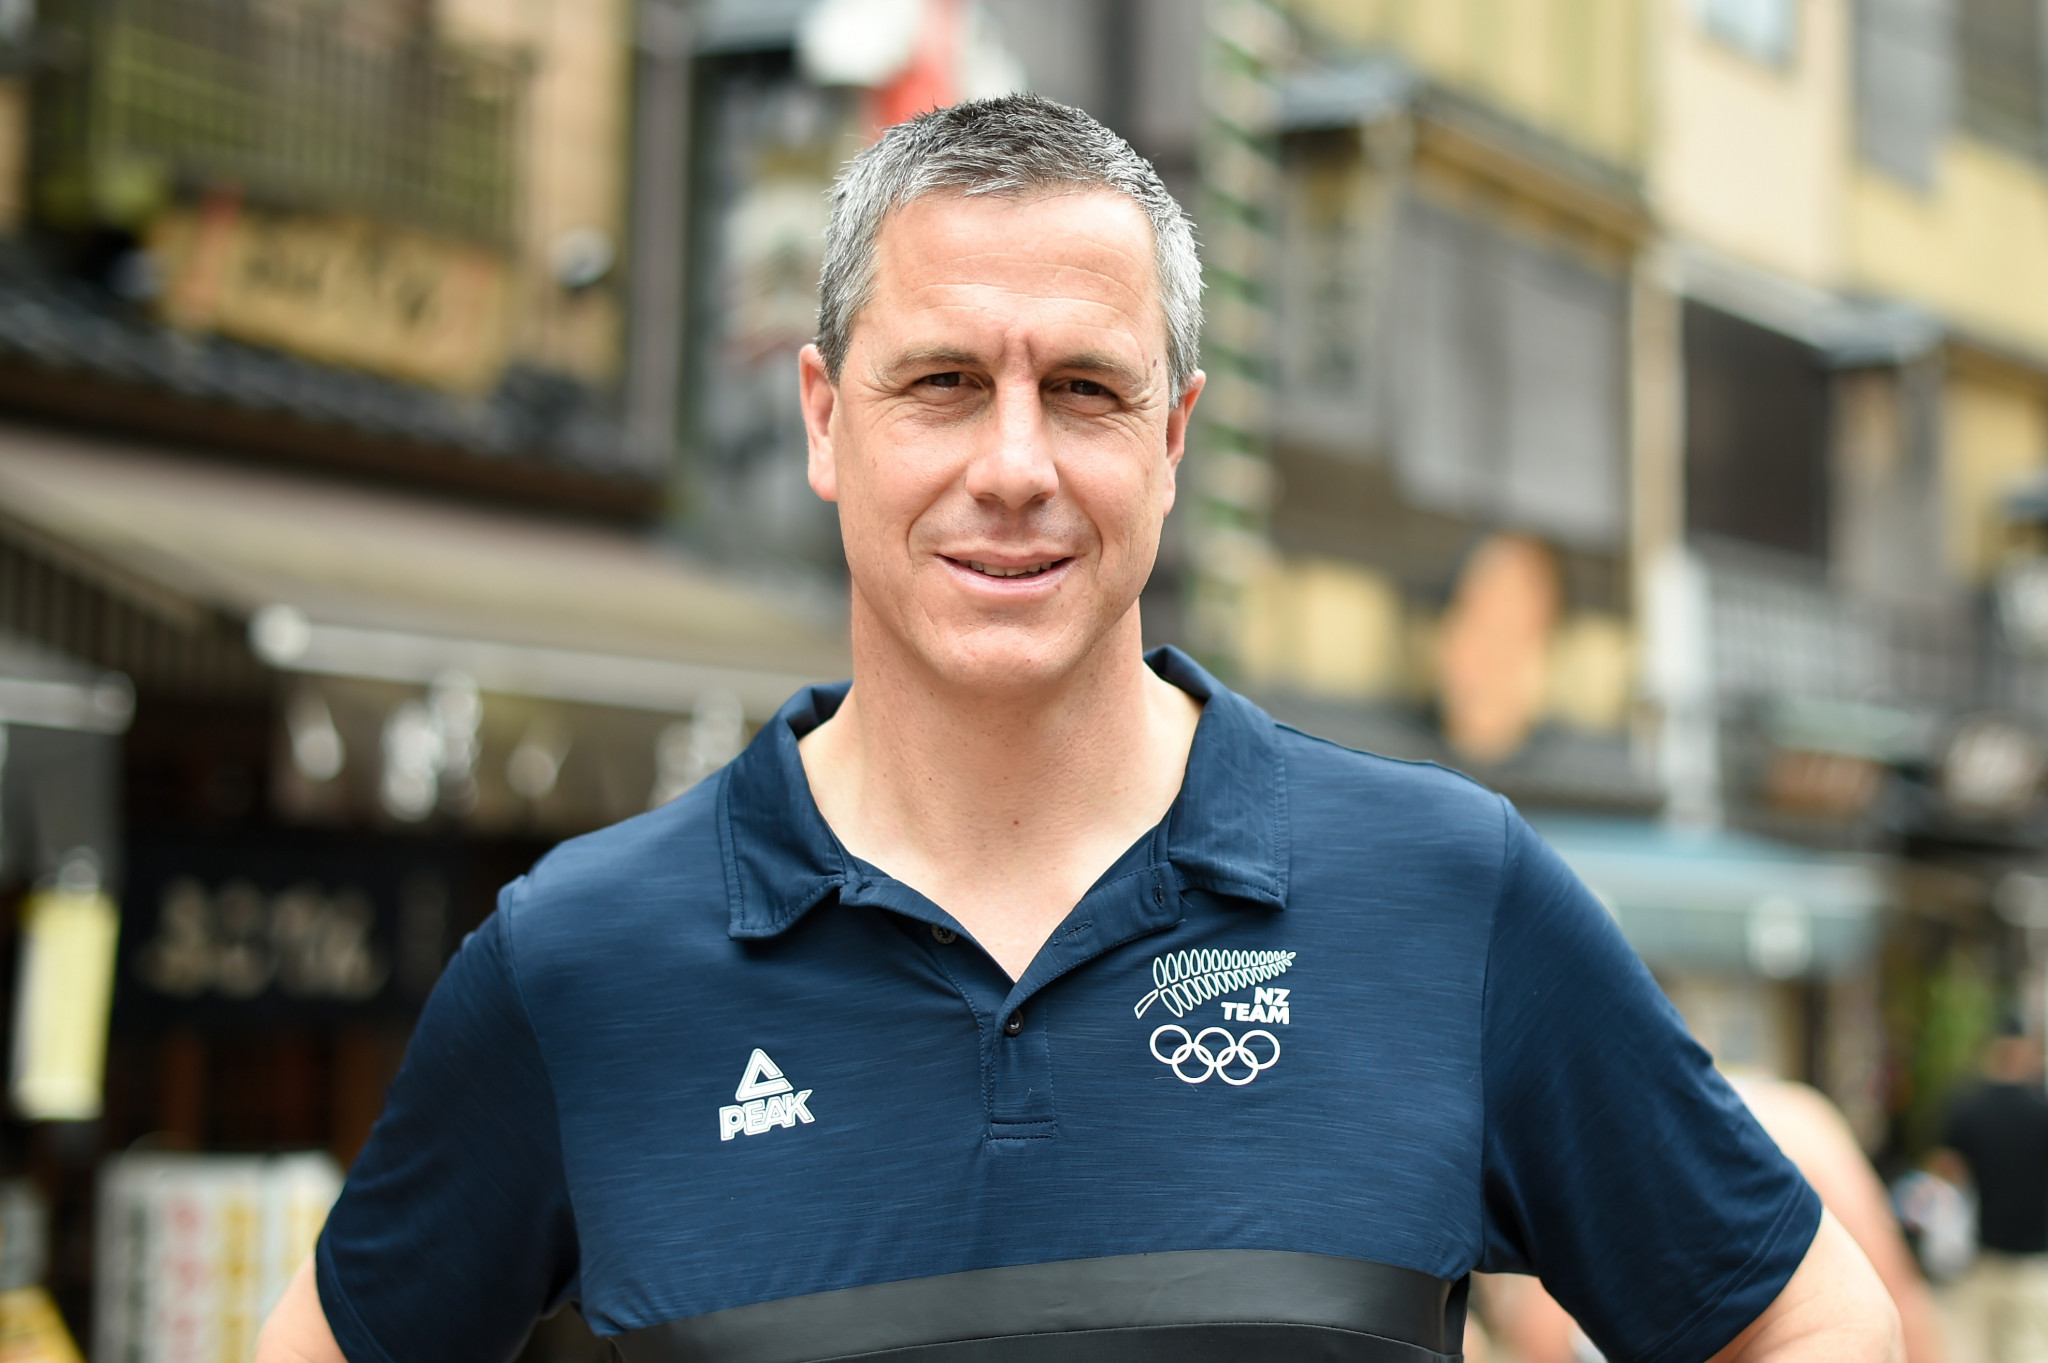 New Zealand Chef de Mission says Tokyo 2020 "several steps ahead" of Rio 2016 at similar stage